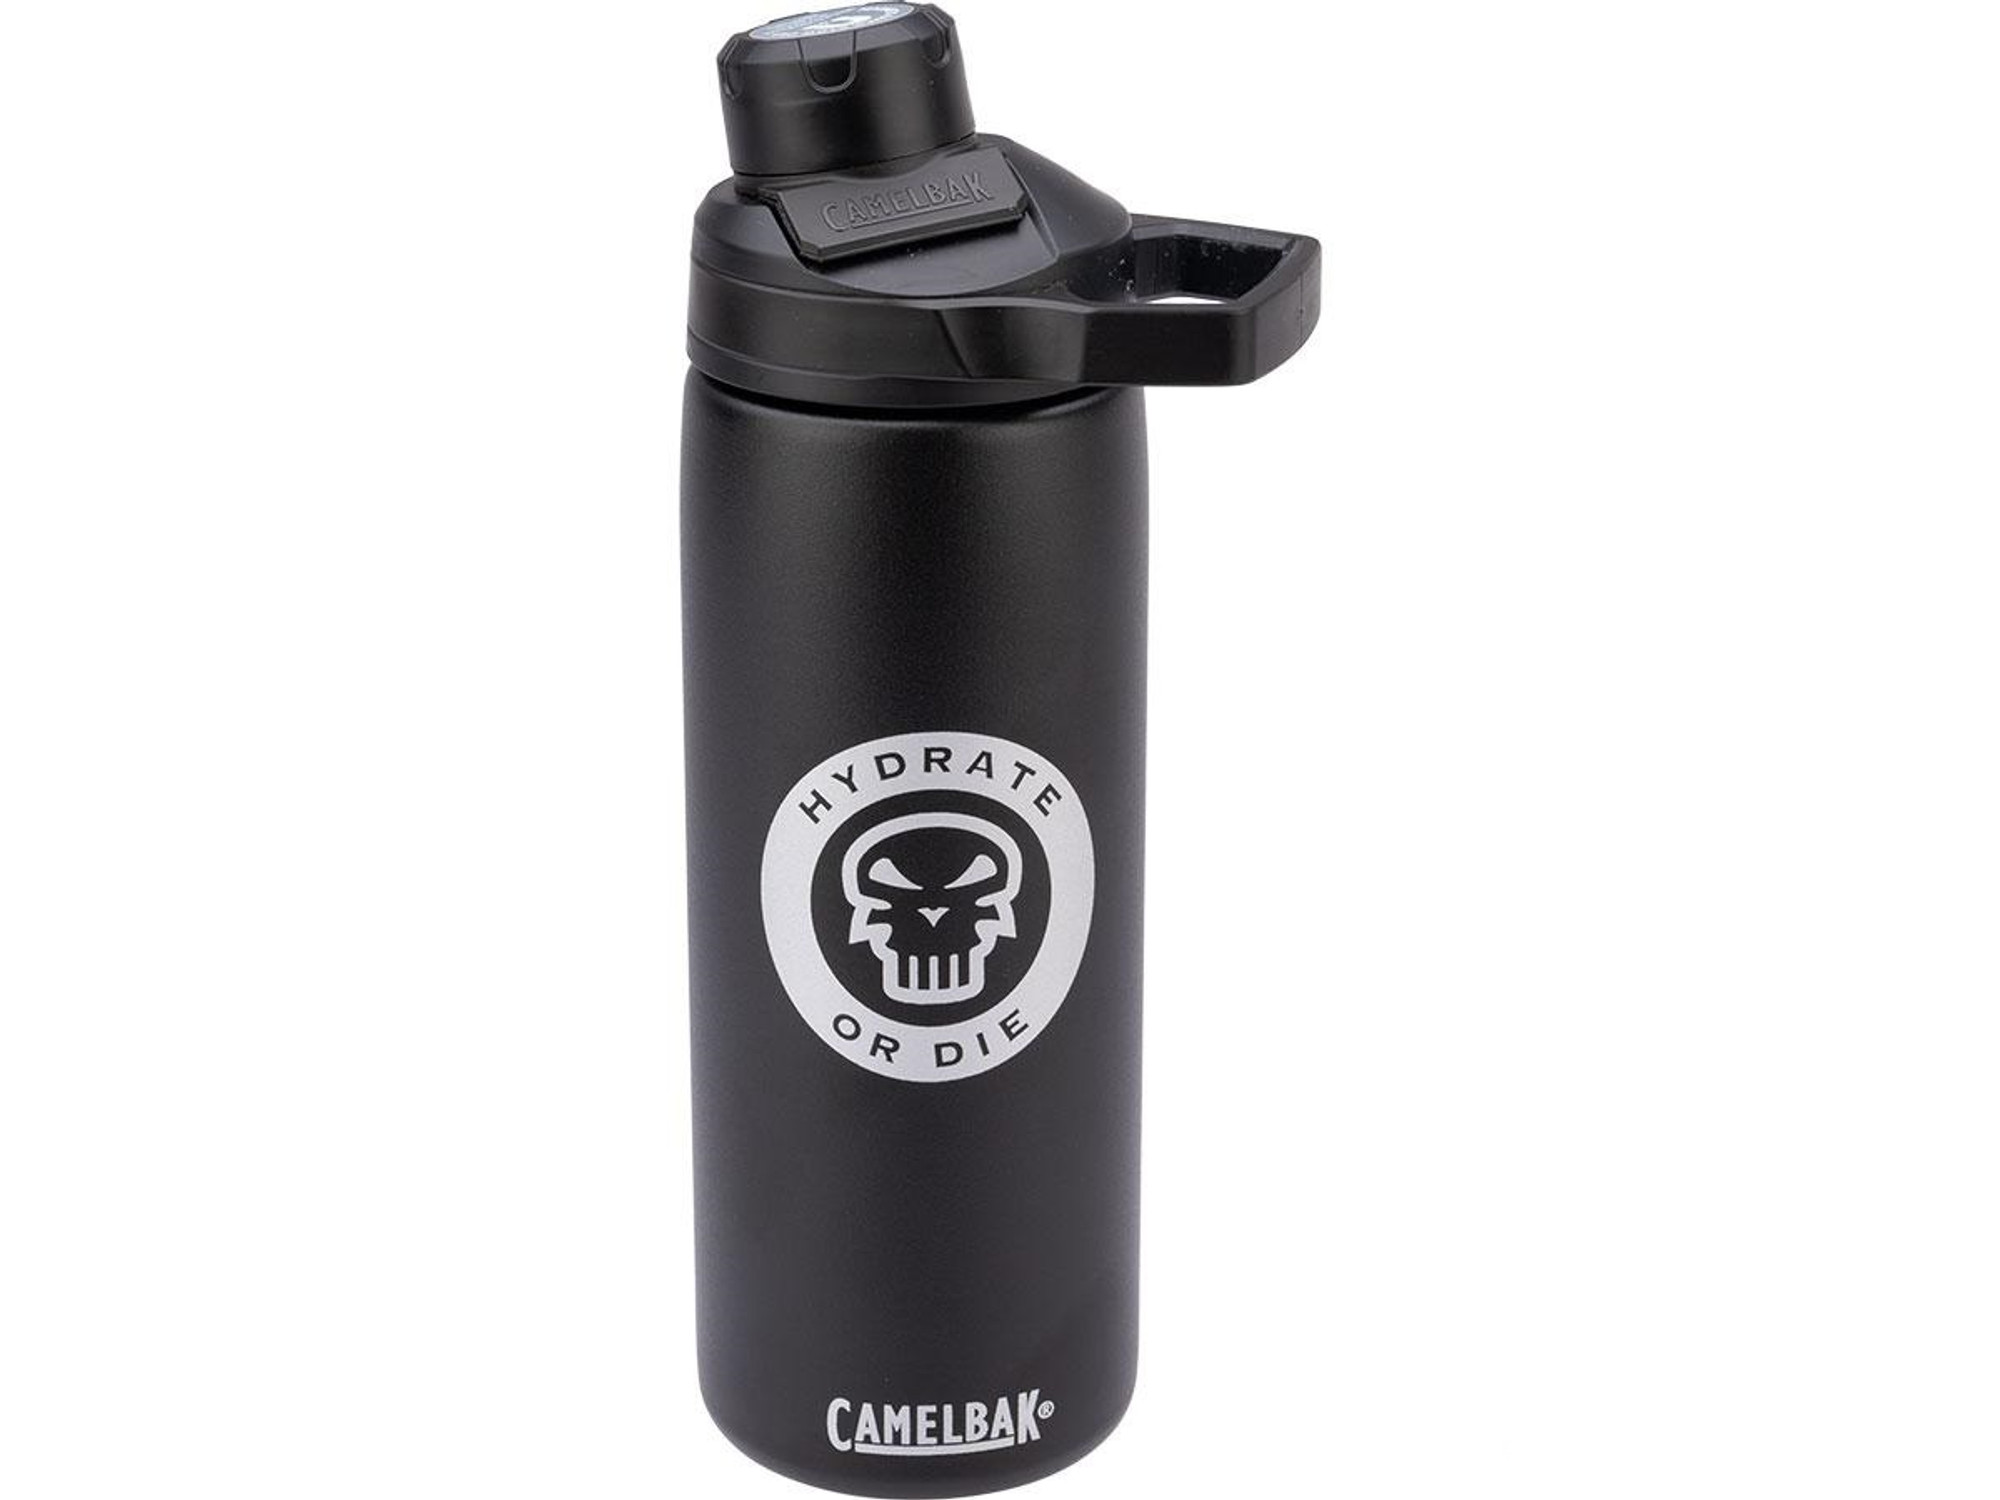 CamelBak Chute Mag Vacuum Insulated Stainless Steel Water Bottle (Size: 20oz / Black "Hydrate or Die")